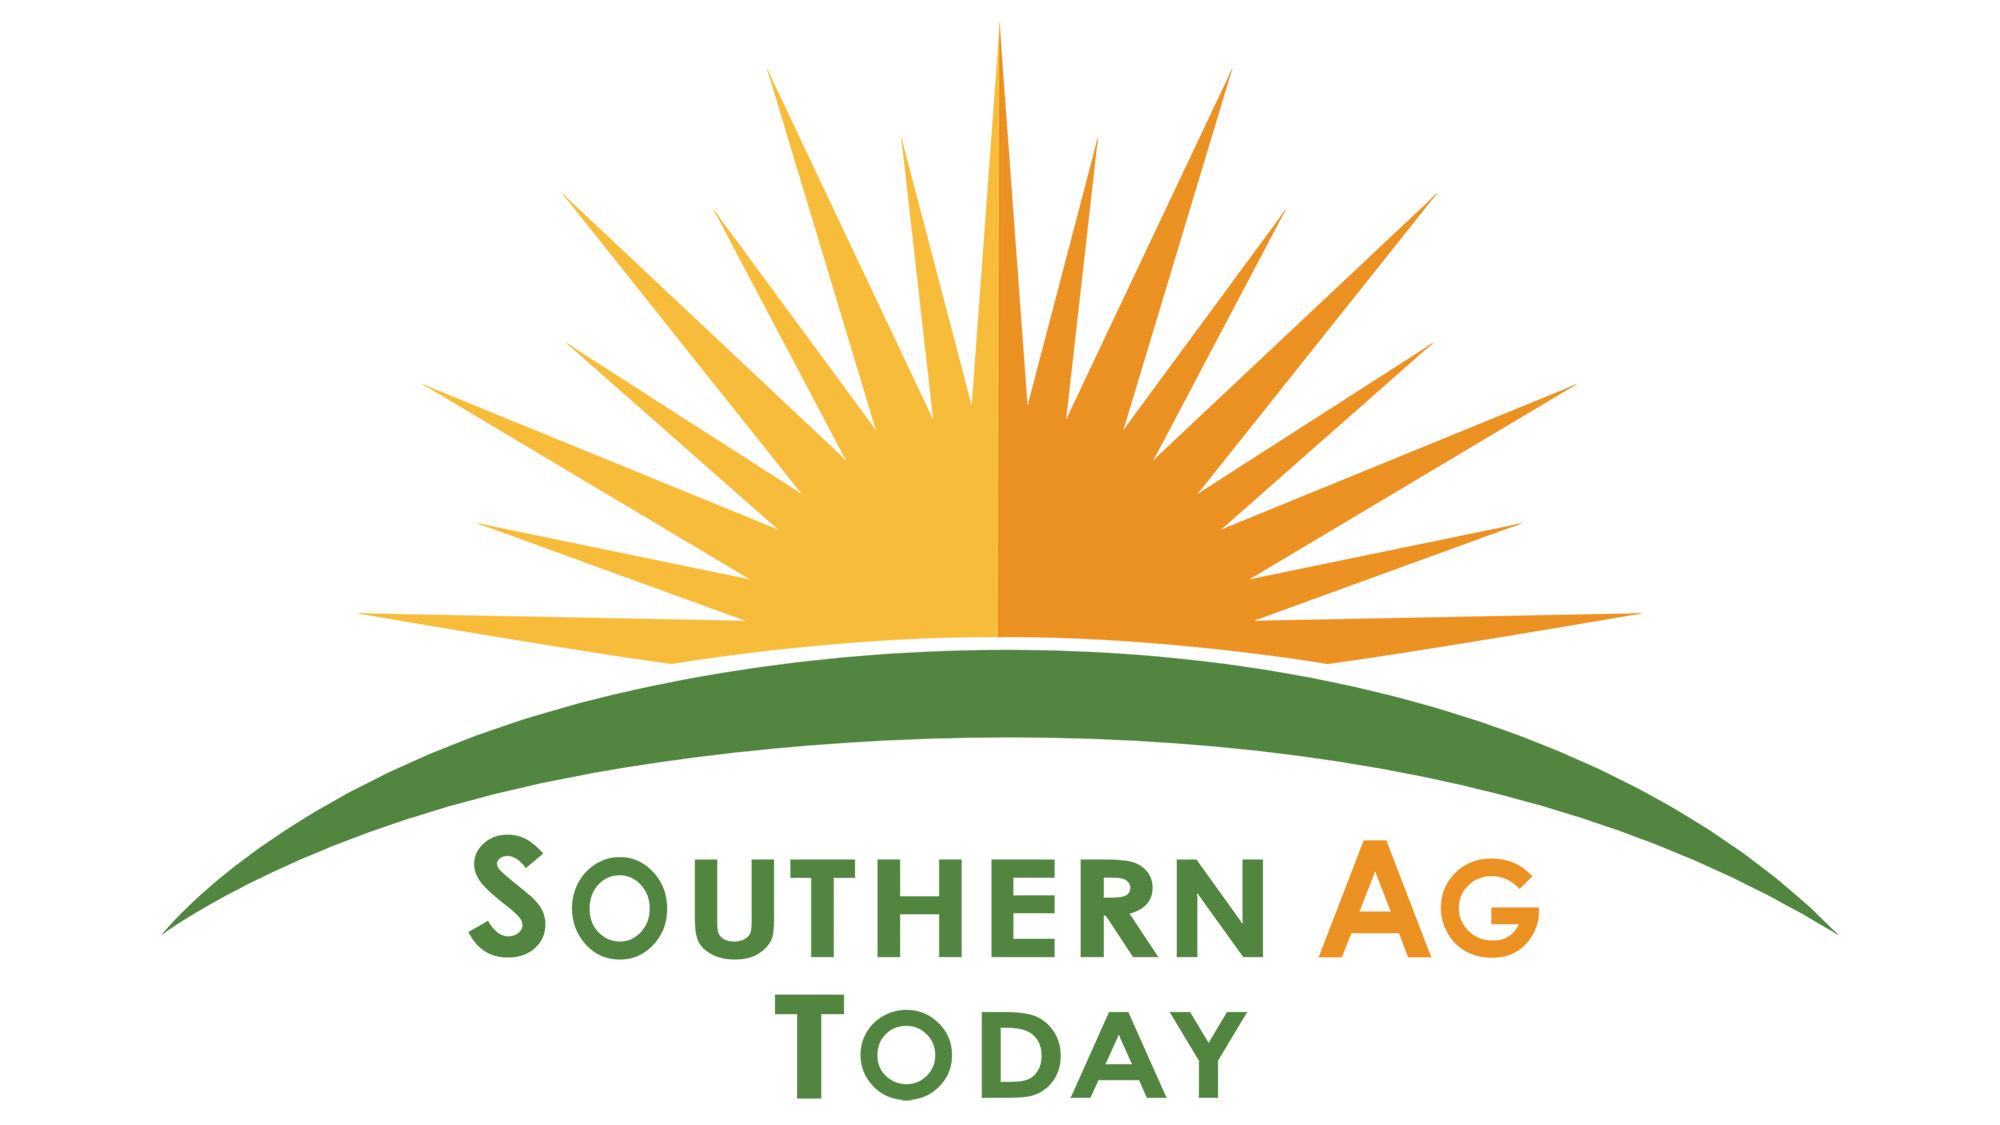 Southern Ag Today logo